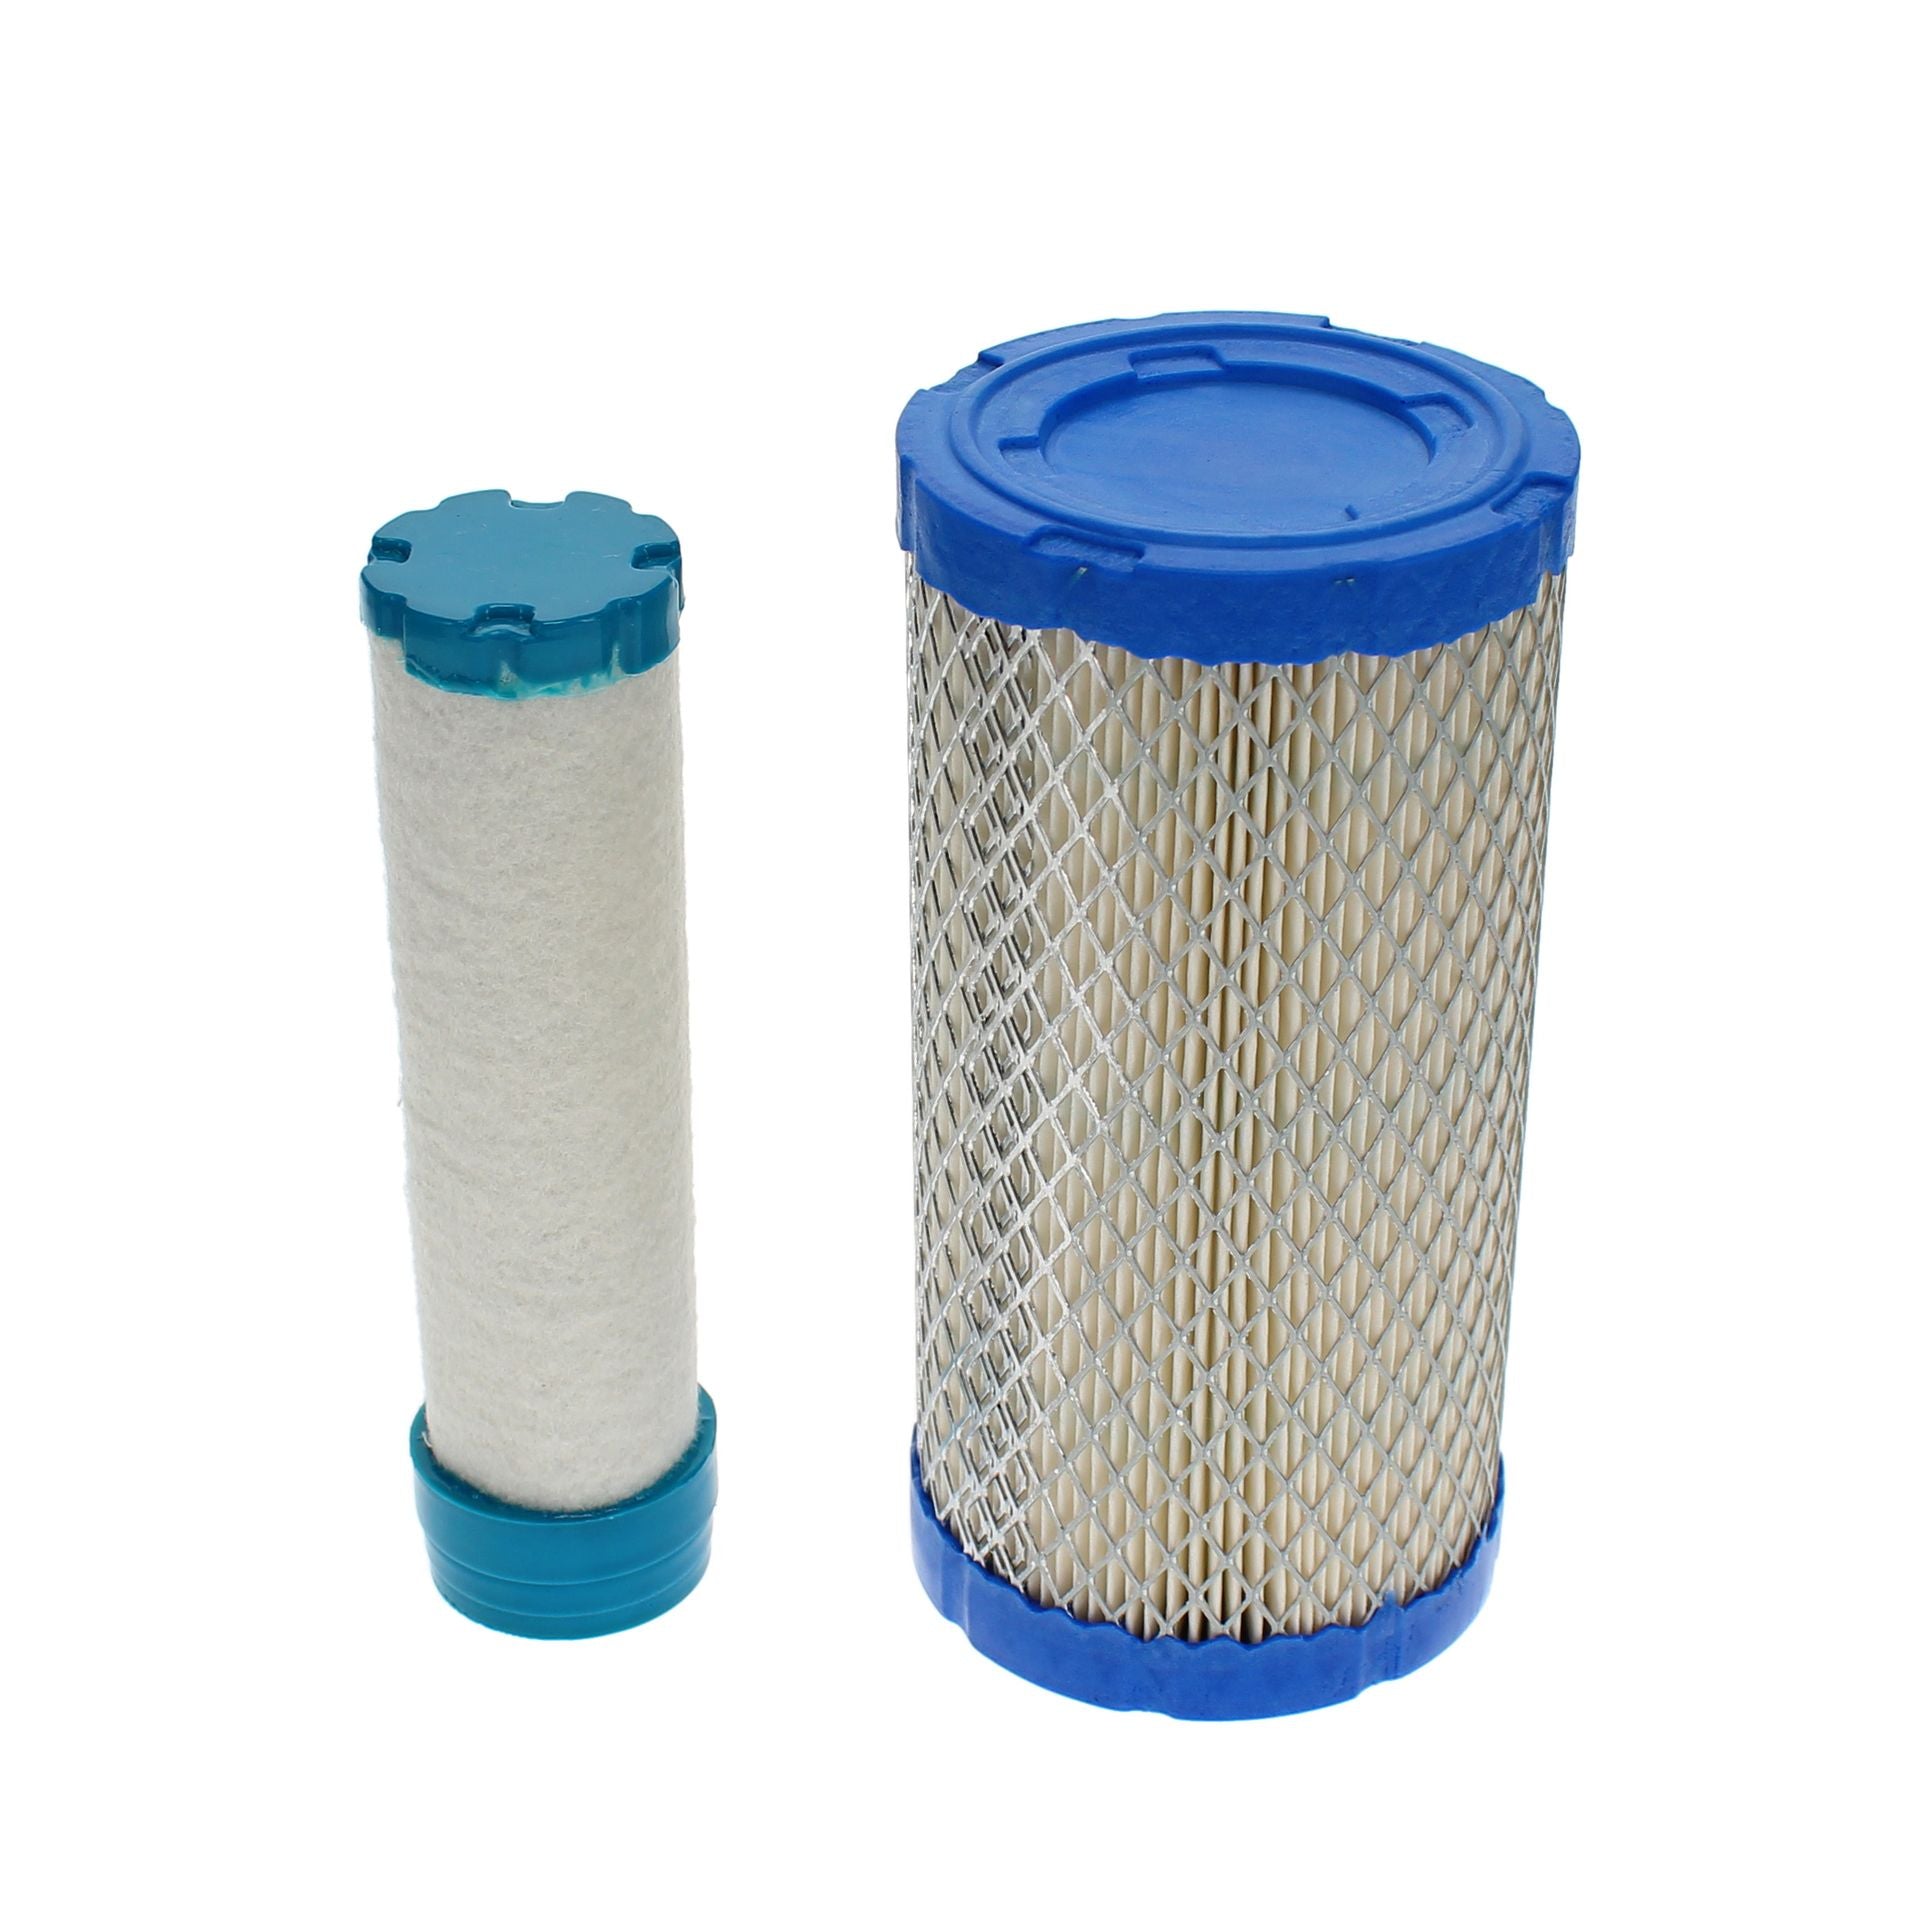 Air Filter Kit fits Kohler CH25, CH26, CV460-CV493, TH16, TH18, TH520, TH575 and Triad OHC OEM 25 083 02-S (Canister Type)